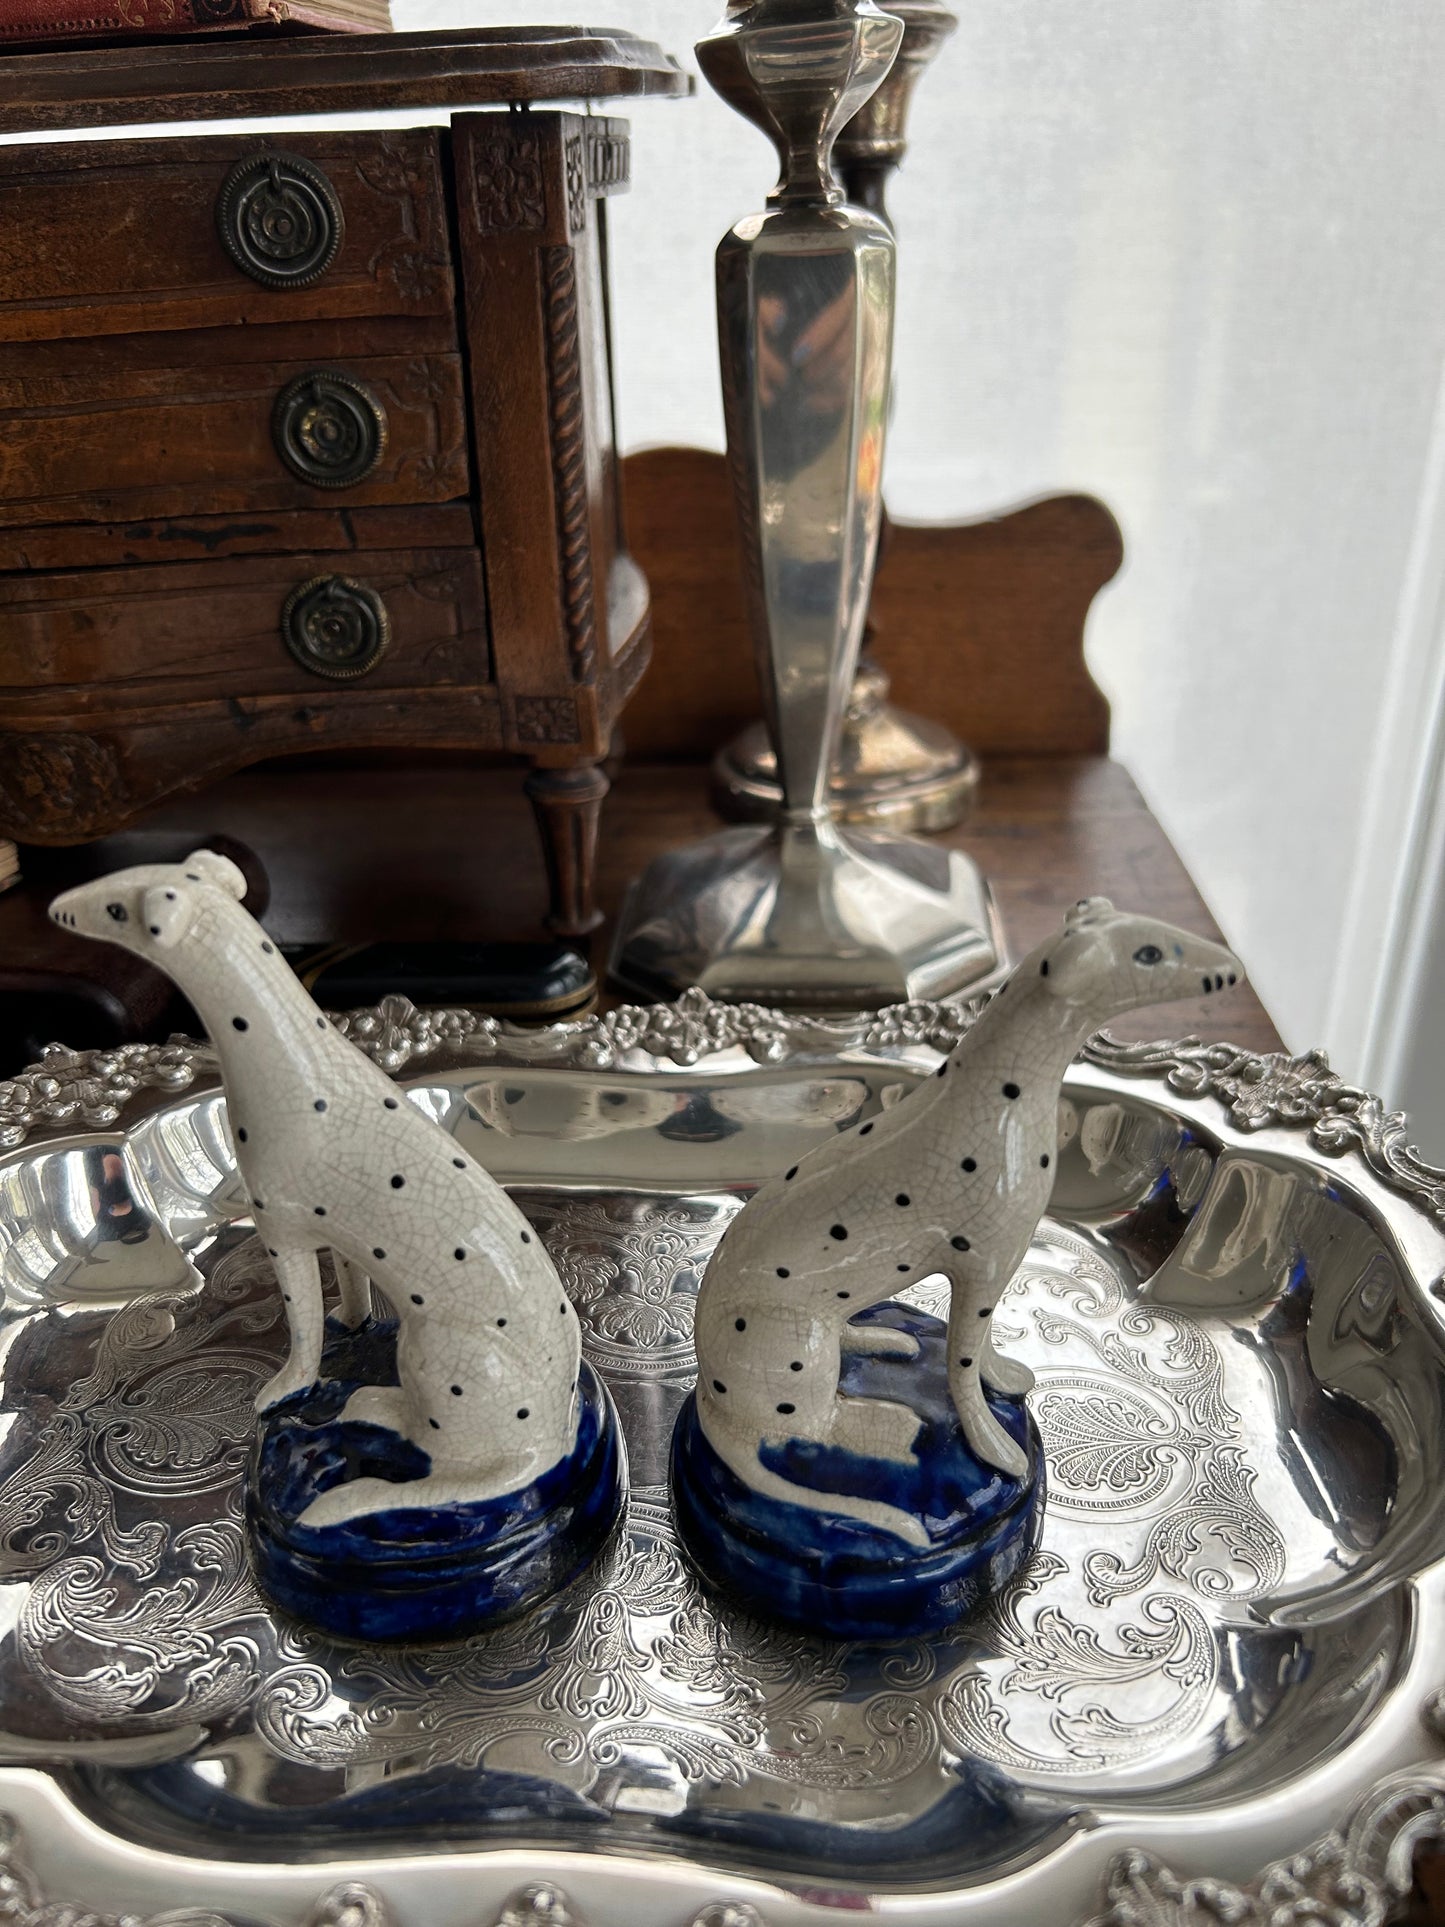 Live 4/16 Antique Pair of Staffordshire Dalmatian Dogs c.1860 4” by 3 1/4”